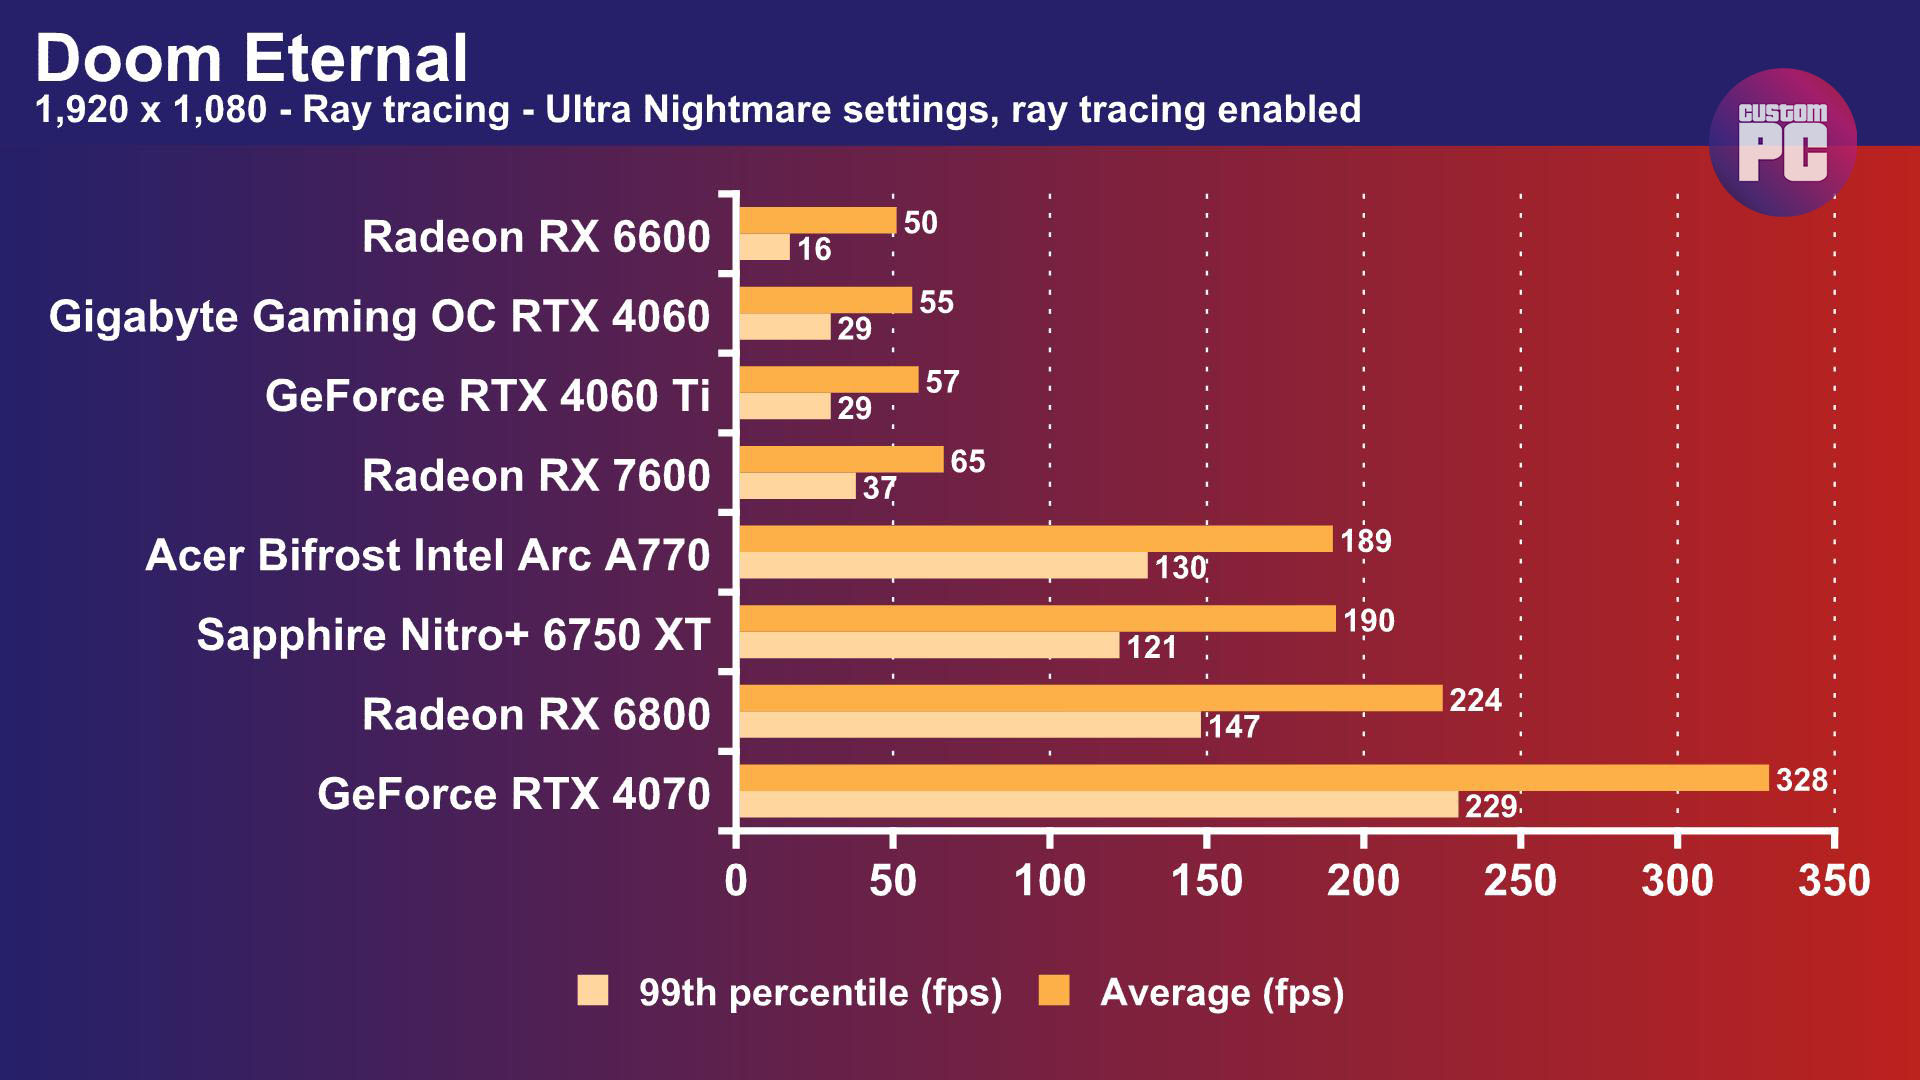 Intel Arc A770: Doom Eternal frame rate at Ultra Nightmare settings with ray tracing enabled